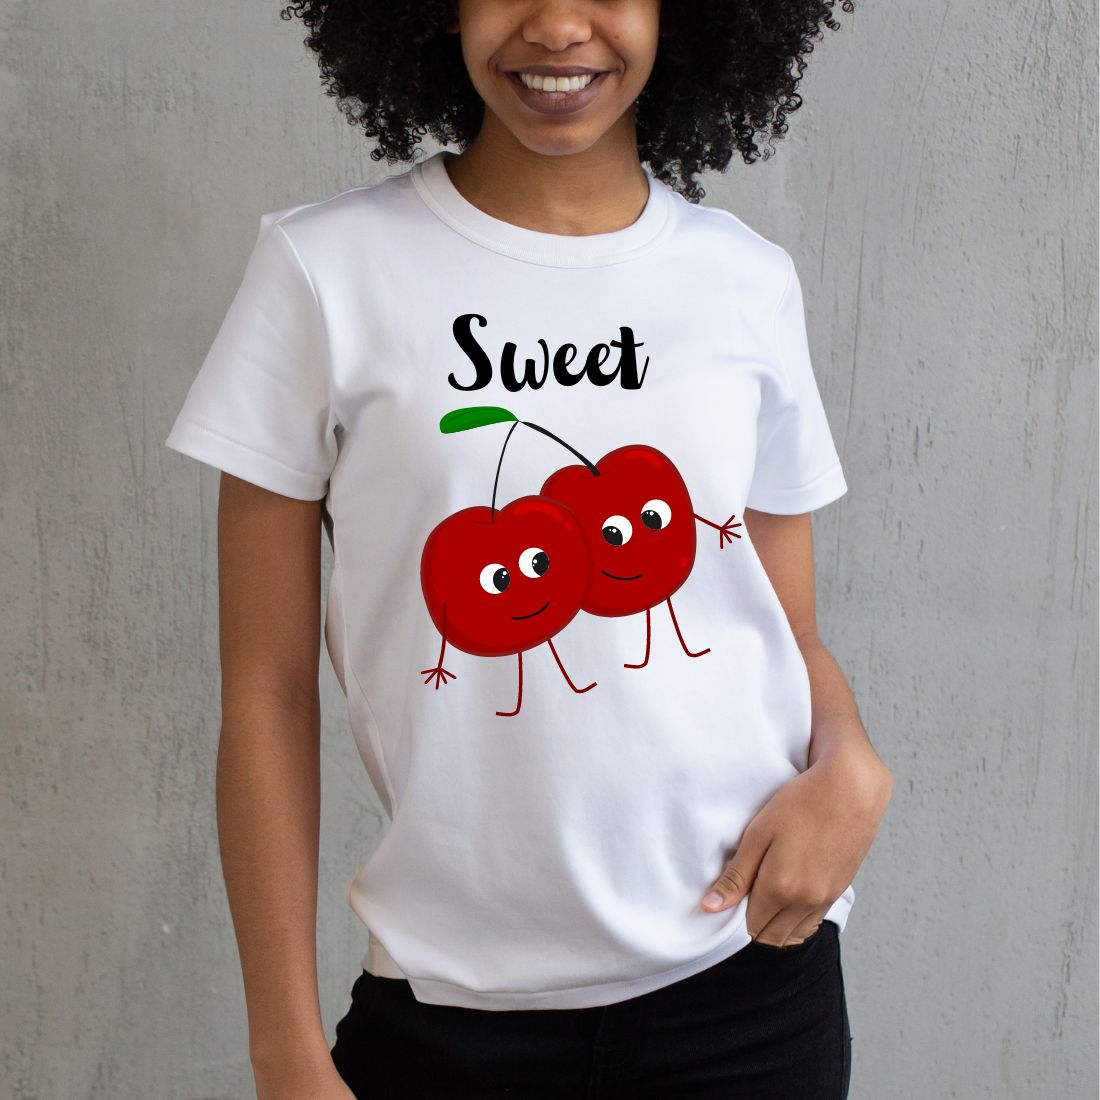 sweet cherries design preview image.